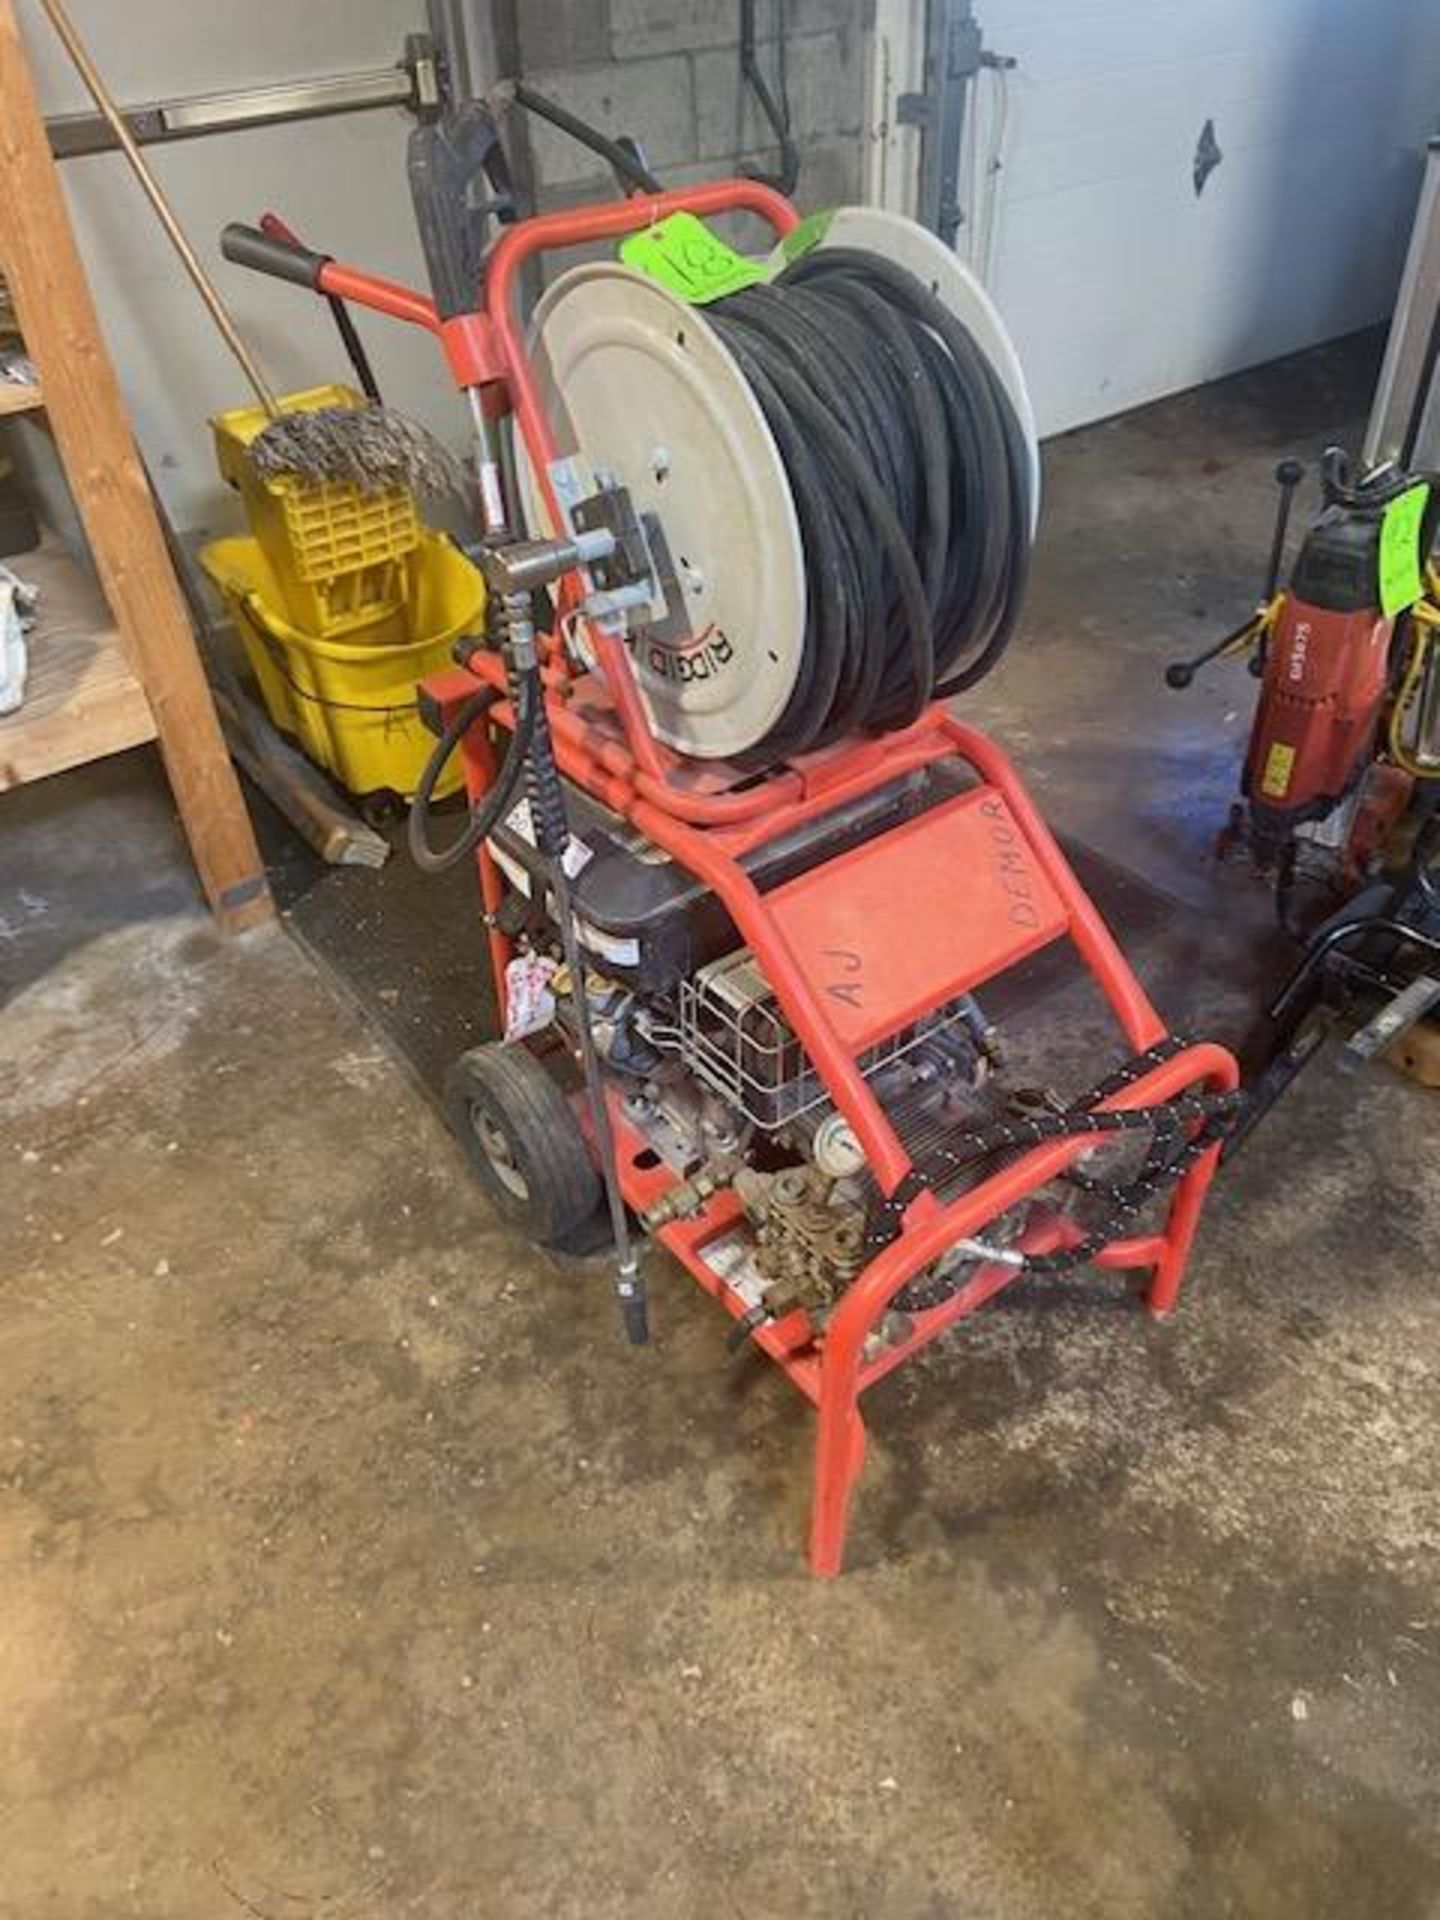 Ridgid Water Jetter, M/N KJ-3100, S/N DS0020670414, with Vanguard 16 Engine, with Retractable Hose